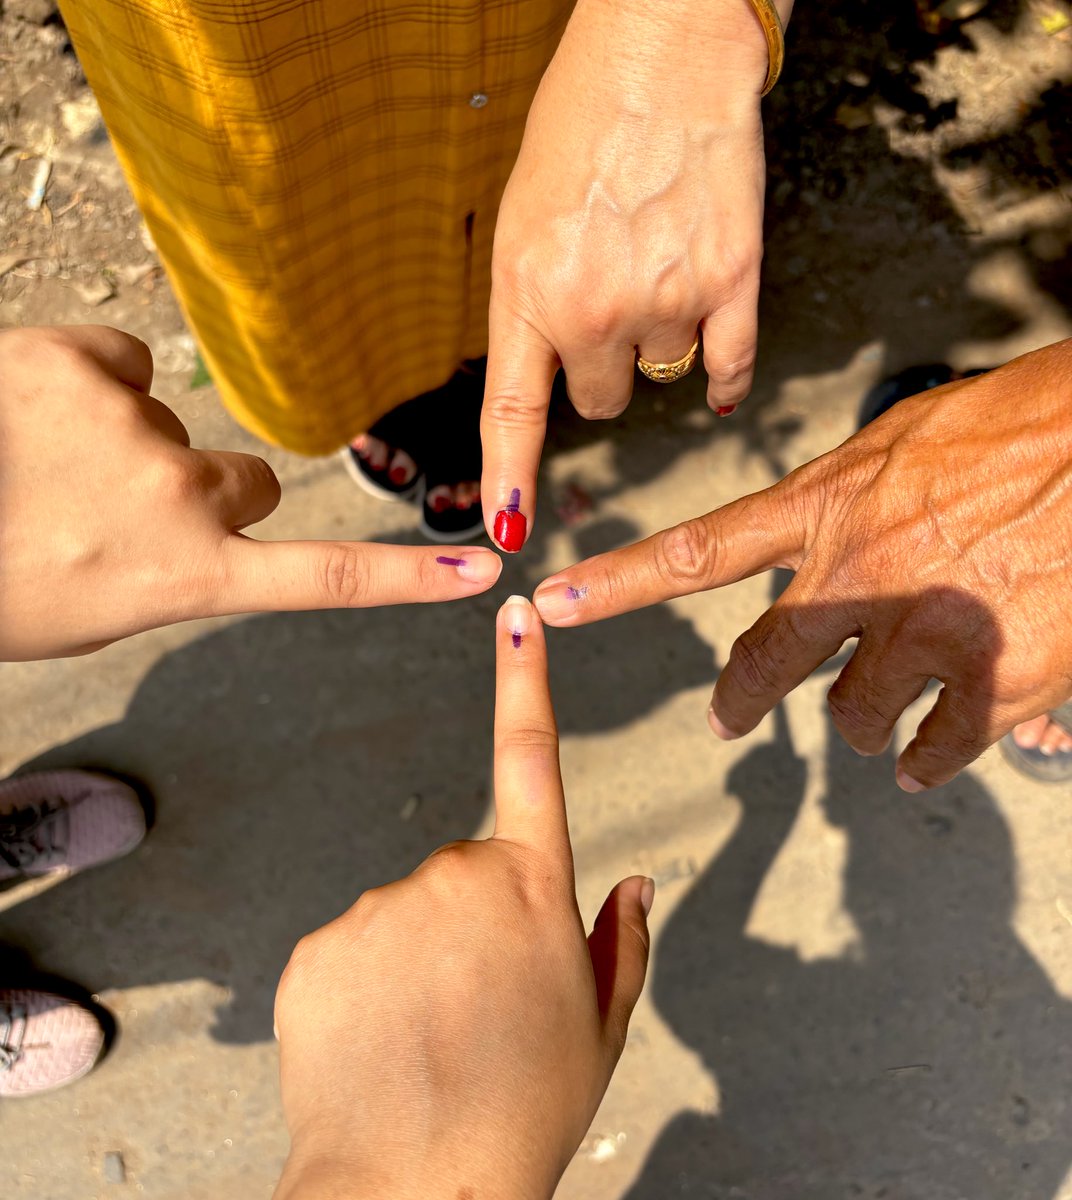 Voted against hate, for democracy 🗳️ GO OUT AND VOTE.